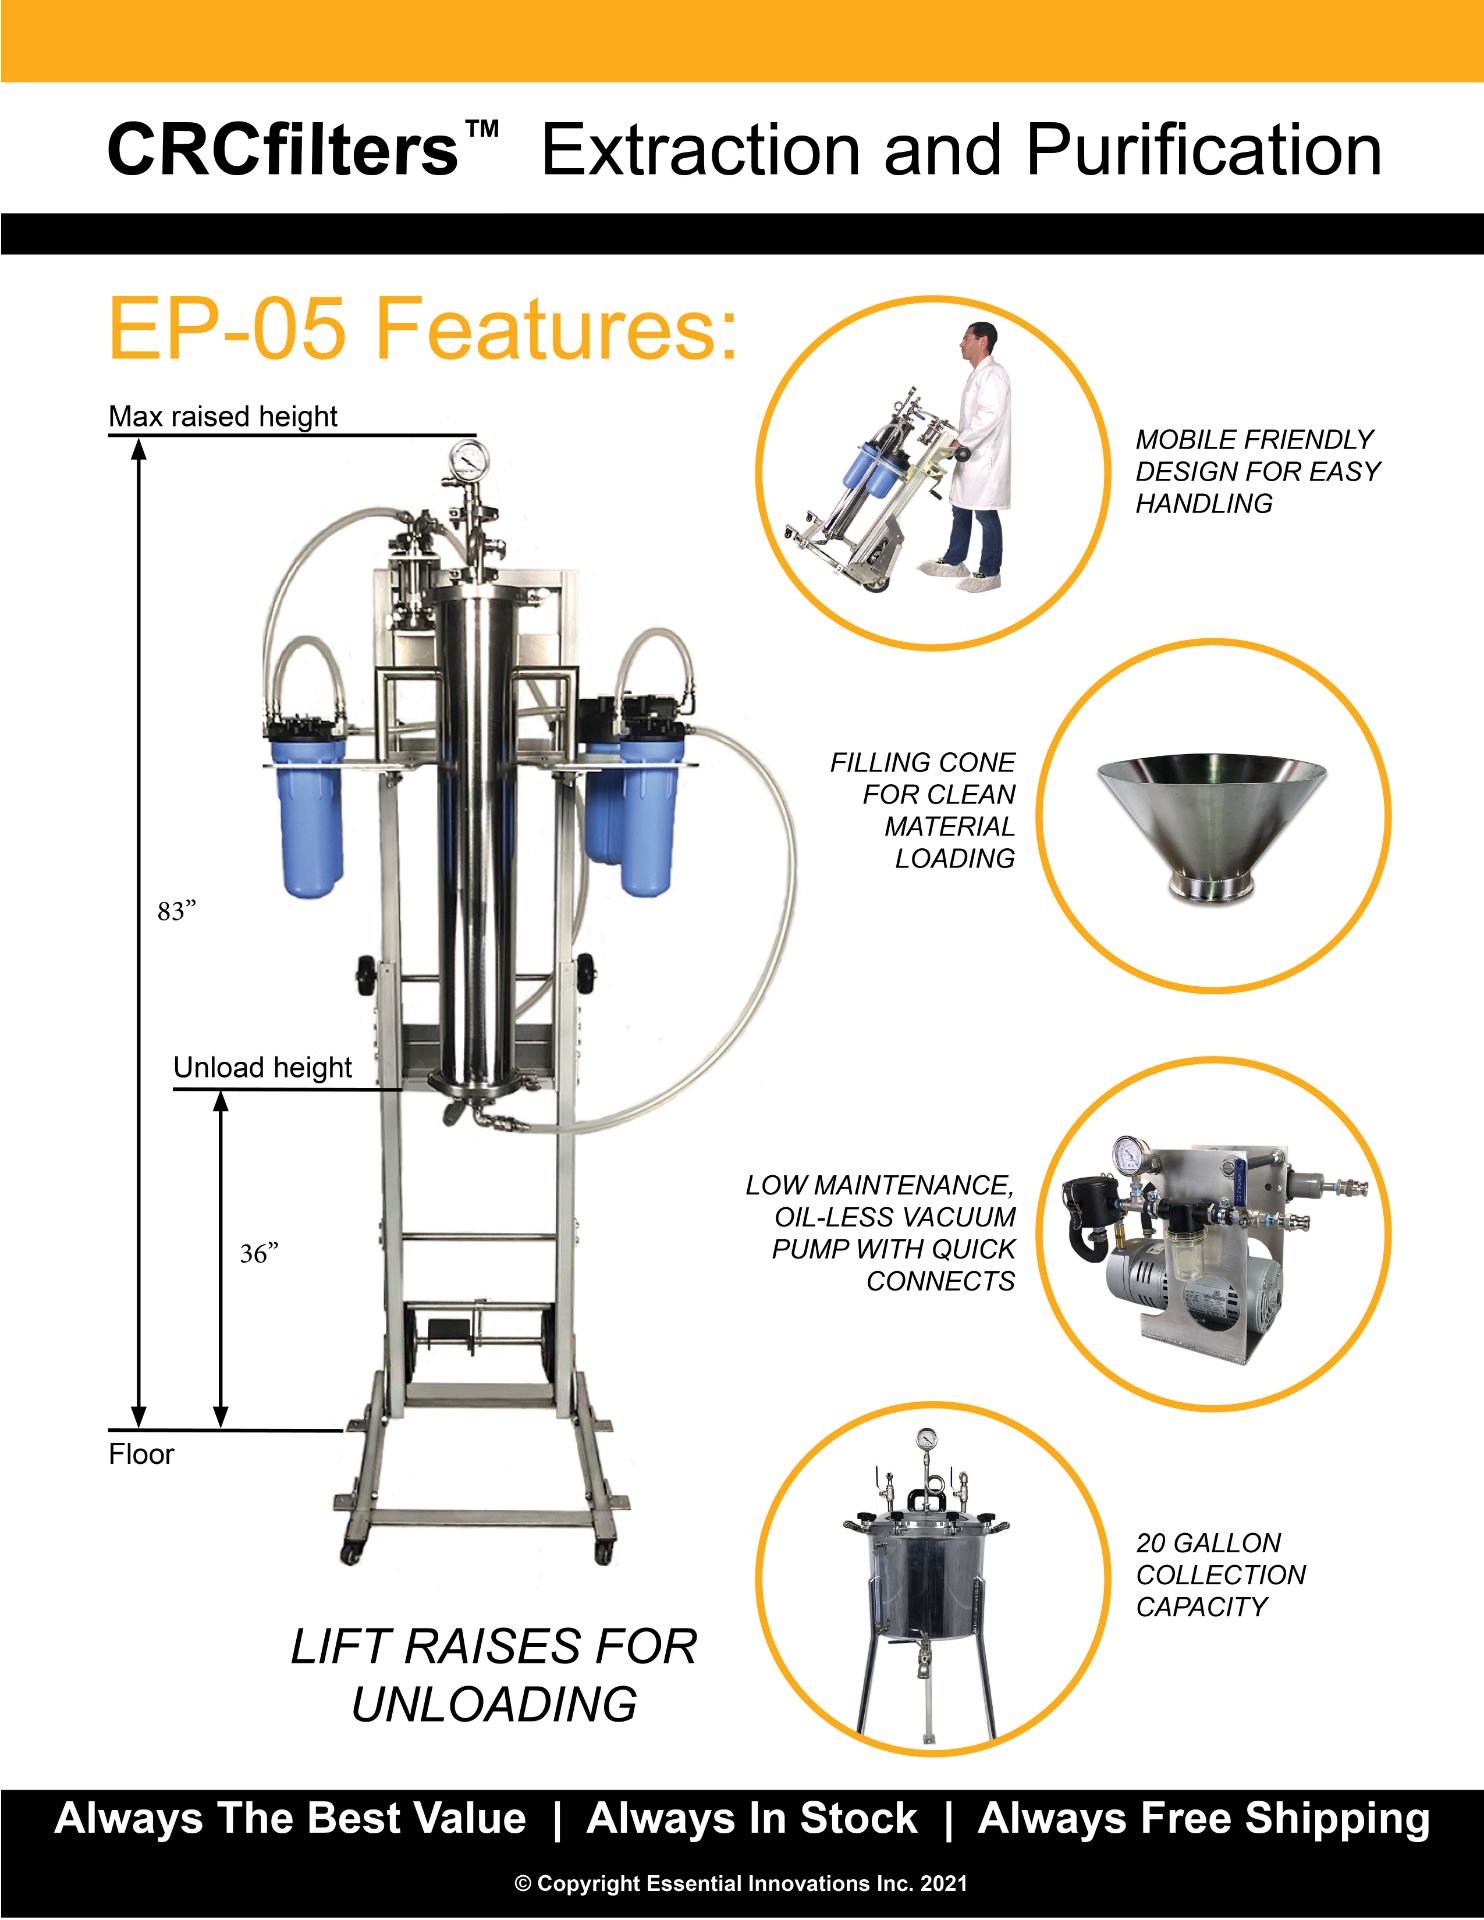 Used-CRCfilters Ethanol Extraction/Purification System. Model EP-05 w/ 20 Gal Collection Vessel - Image 6 of 6